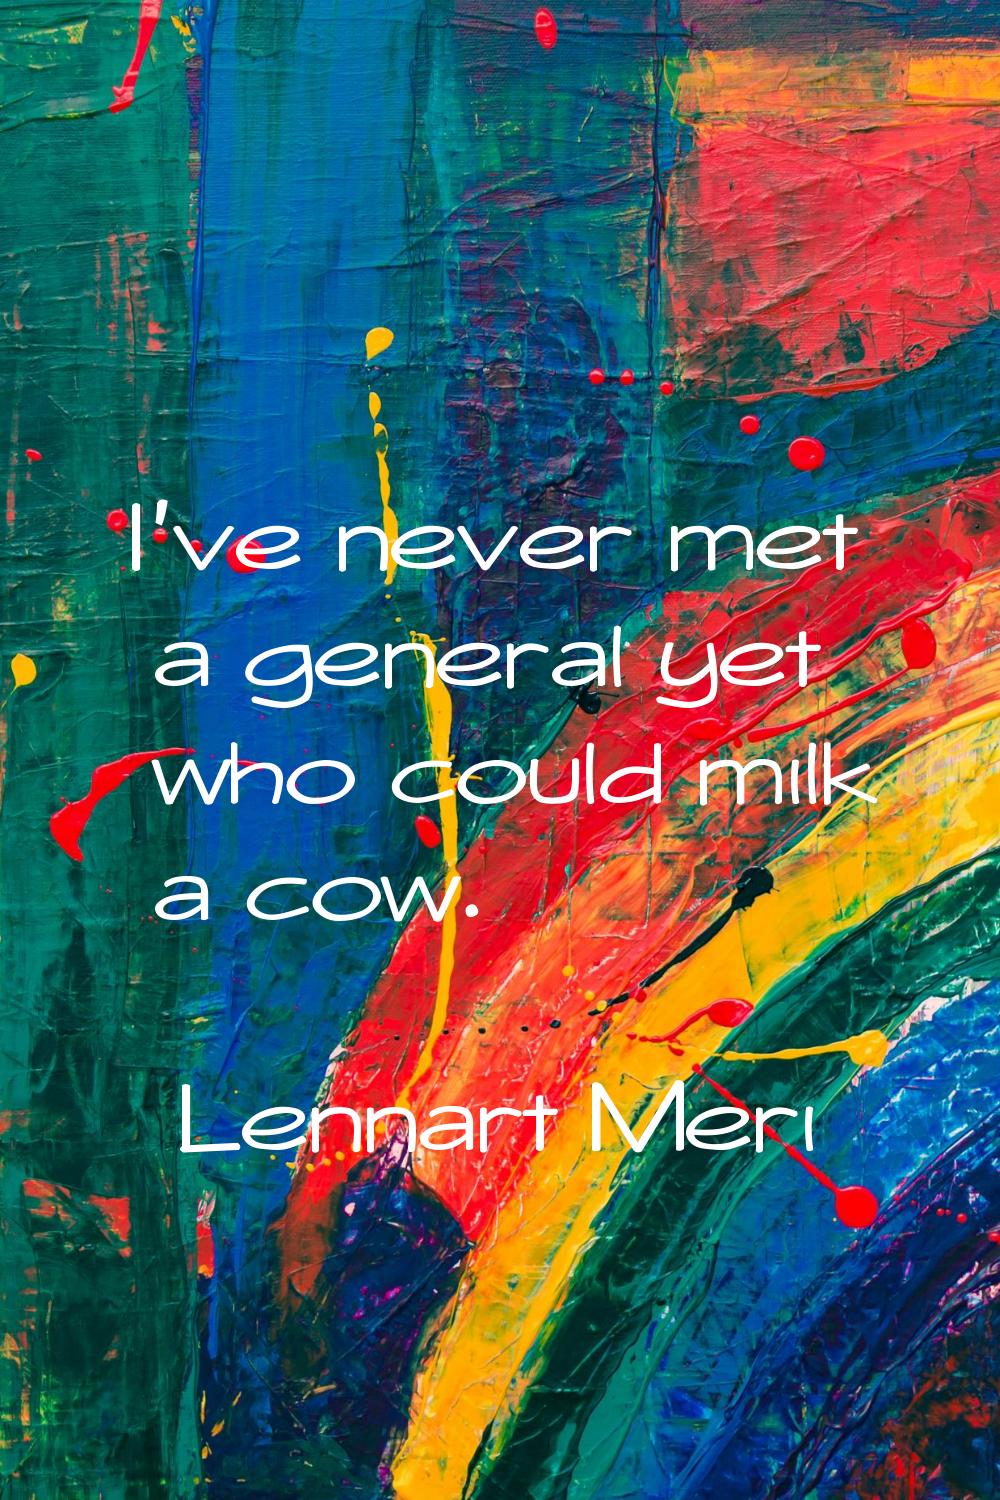 I've never met a general yet who could milk a cow.